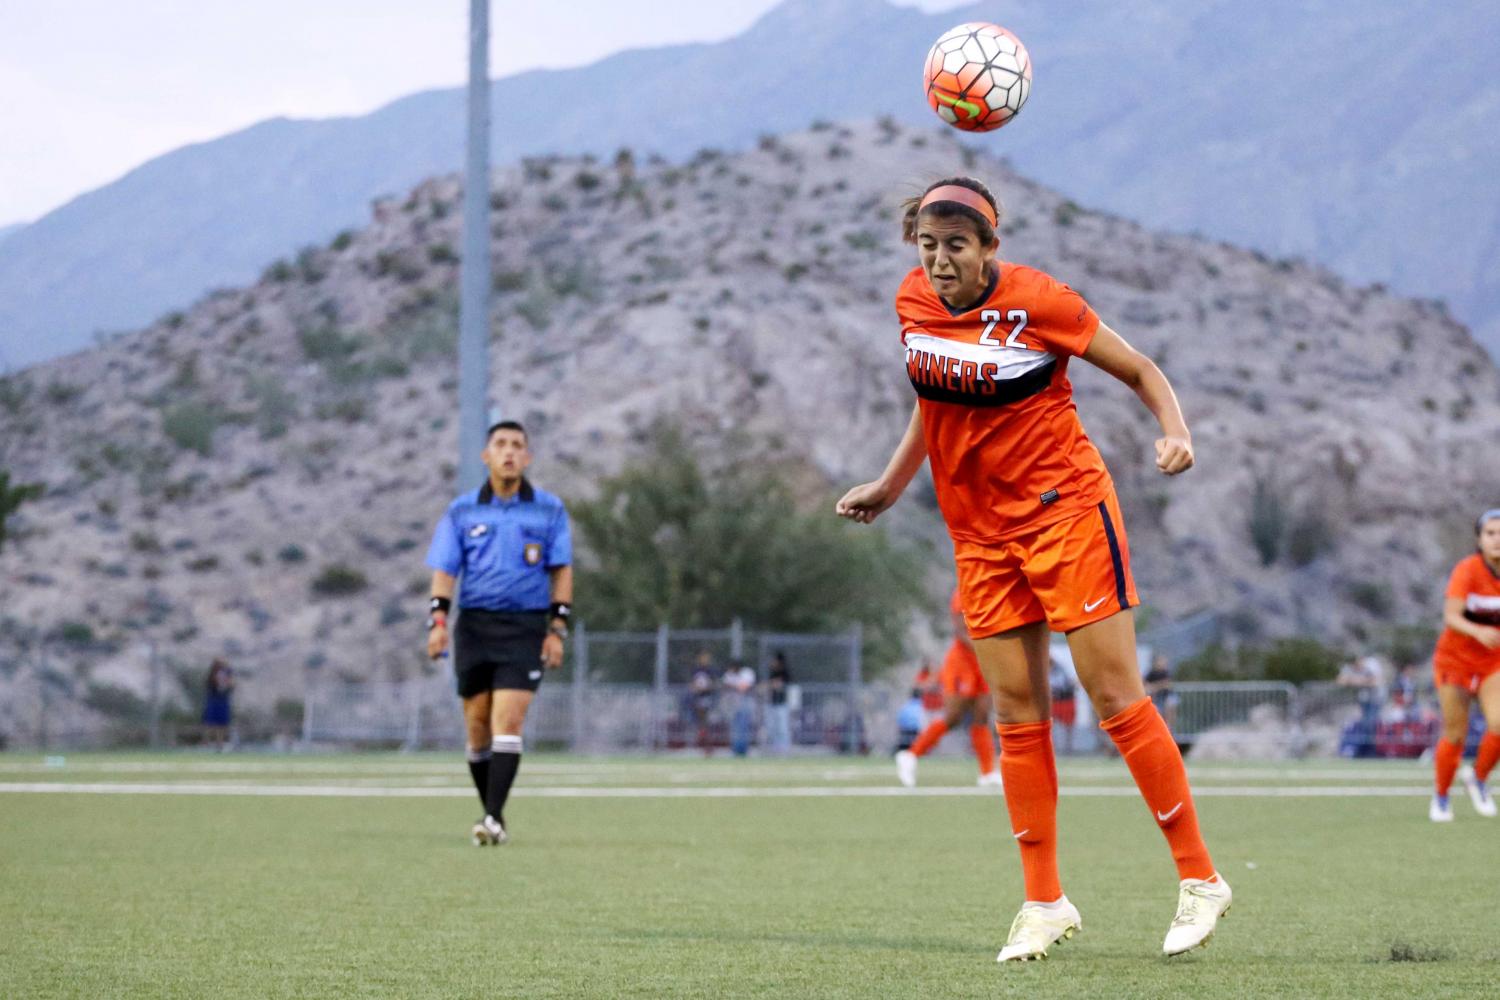 UTEP+soccer+secures+second+win+in+a+row+against+UIW